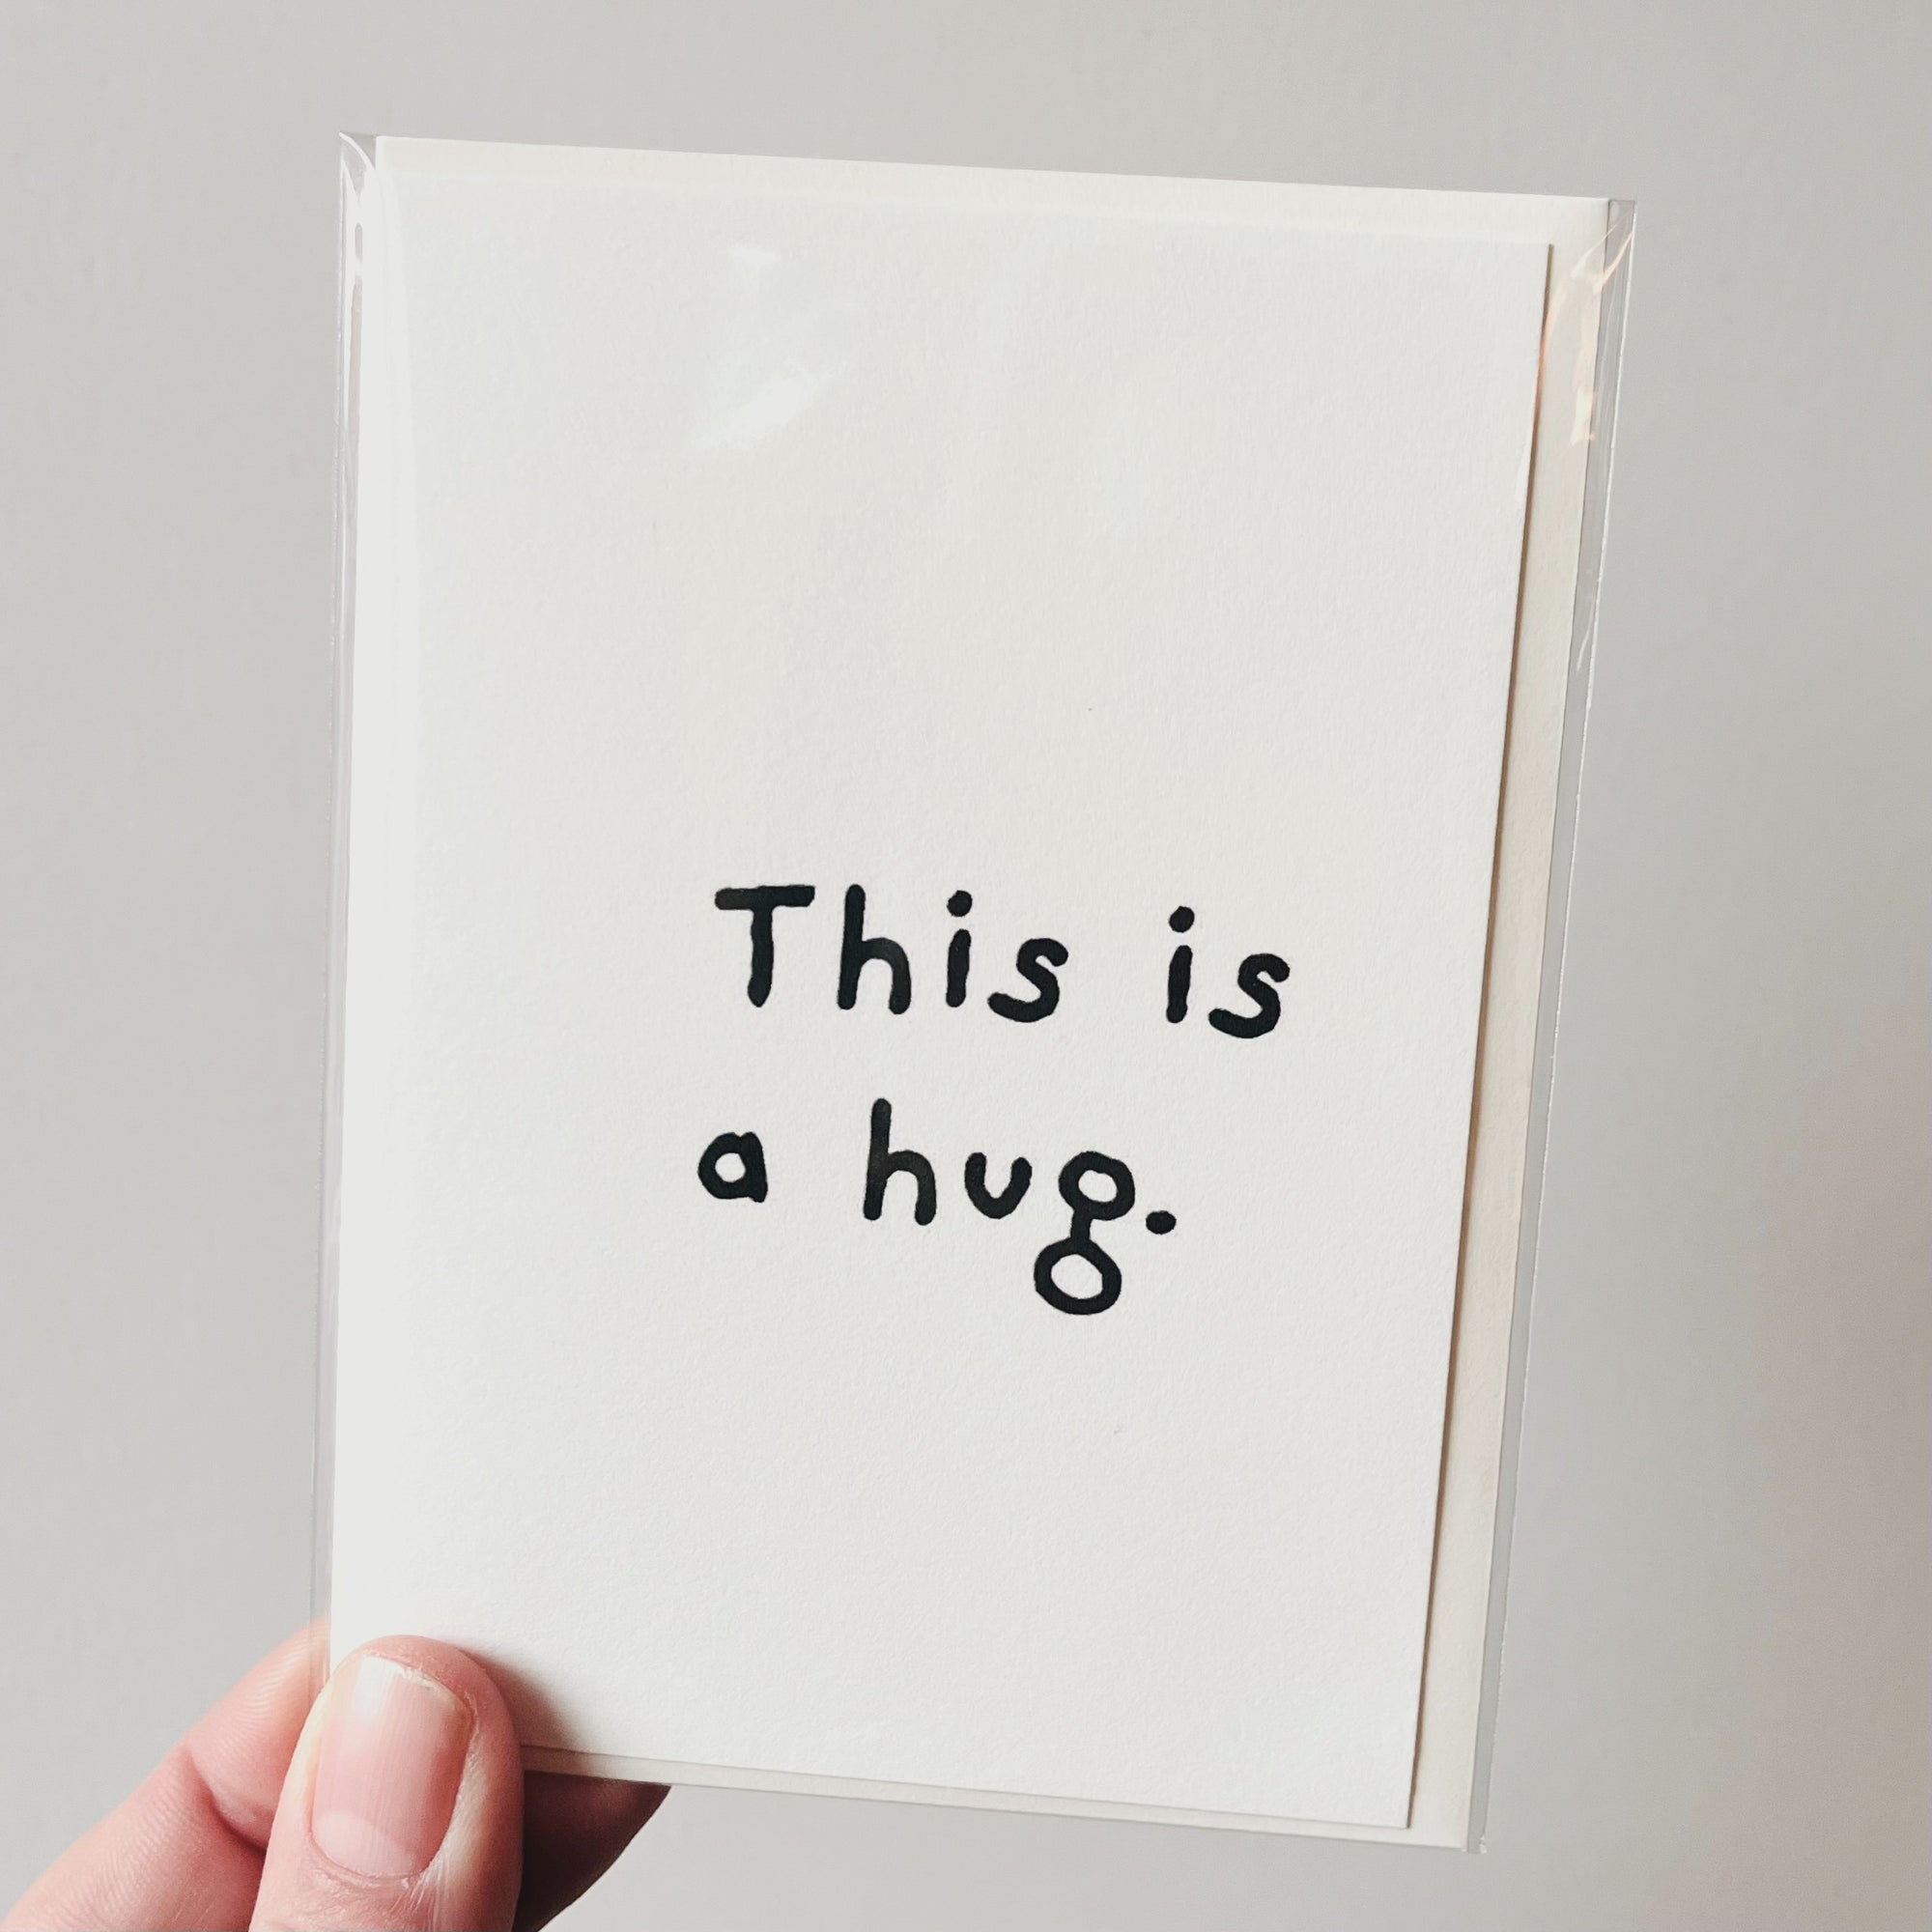 This is a hug.